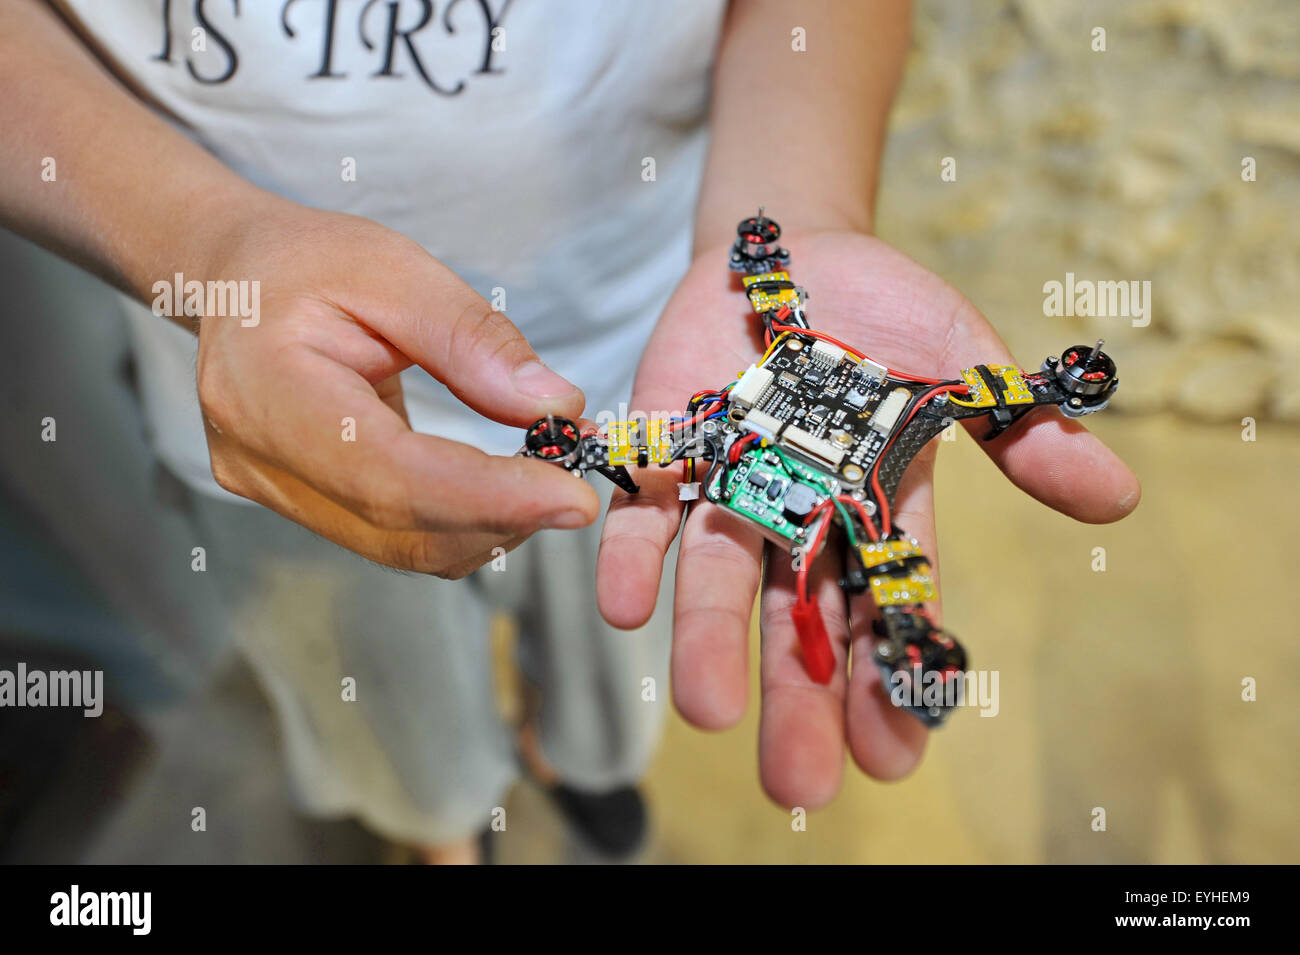 Changchun, China's Jilin Province. 30th July, 2015. Gao Hua shows an automatic-tracking drone at the Baidu Pioneer Park in Changchun, capital of northeast China's Jilin Province, July 30, 2015. Graduated from Jilin University, Gao Hua and Hou Xiaoye are both enthusiasts in science and technology. Getting bored with average work, they founded their geek studio which undertakes innovation of gadgets such as 3D printers, drones and wearable virtual reality headsets that they believe can change people's everyday life. © Zhang Nan/Xinhua/Alamy Live News Stock Photo